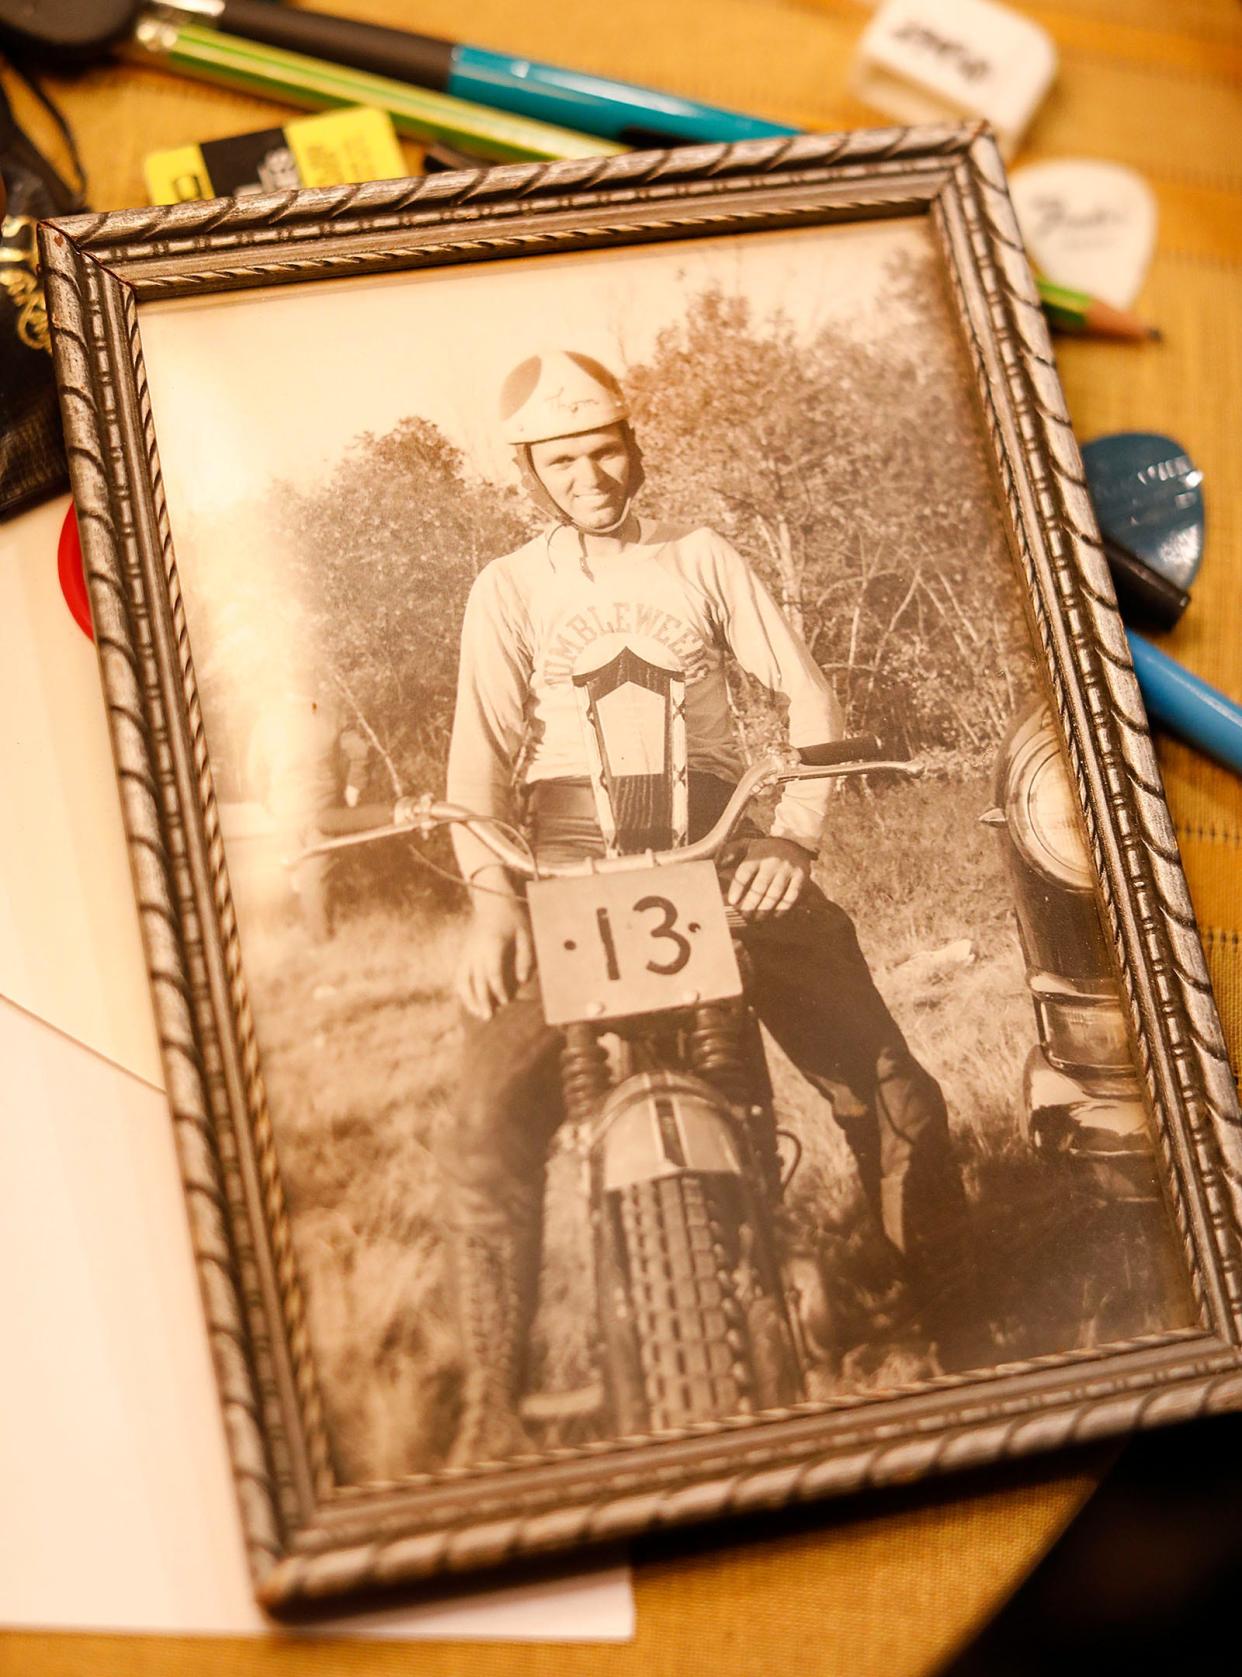 Tom Grono used to ride in dirt bike races every weekend when he was a young man.